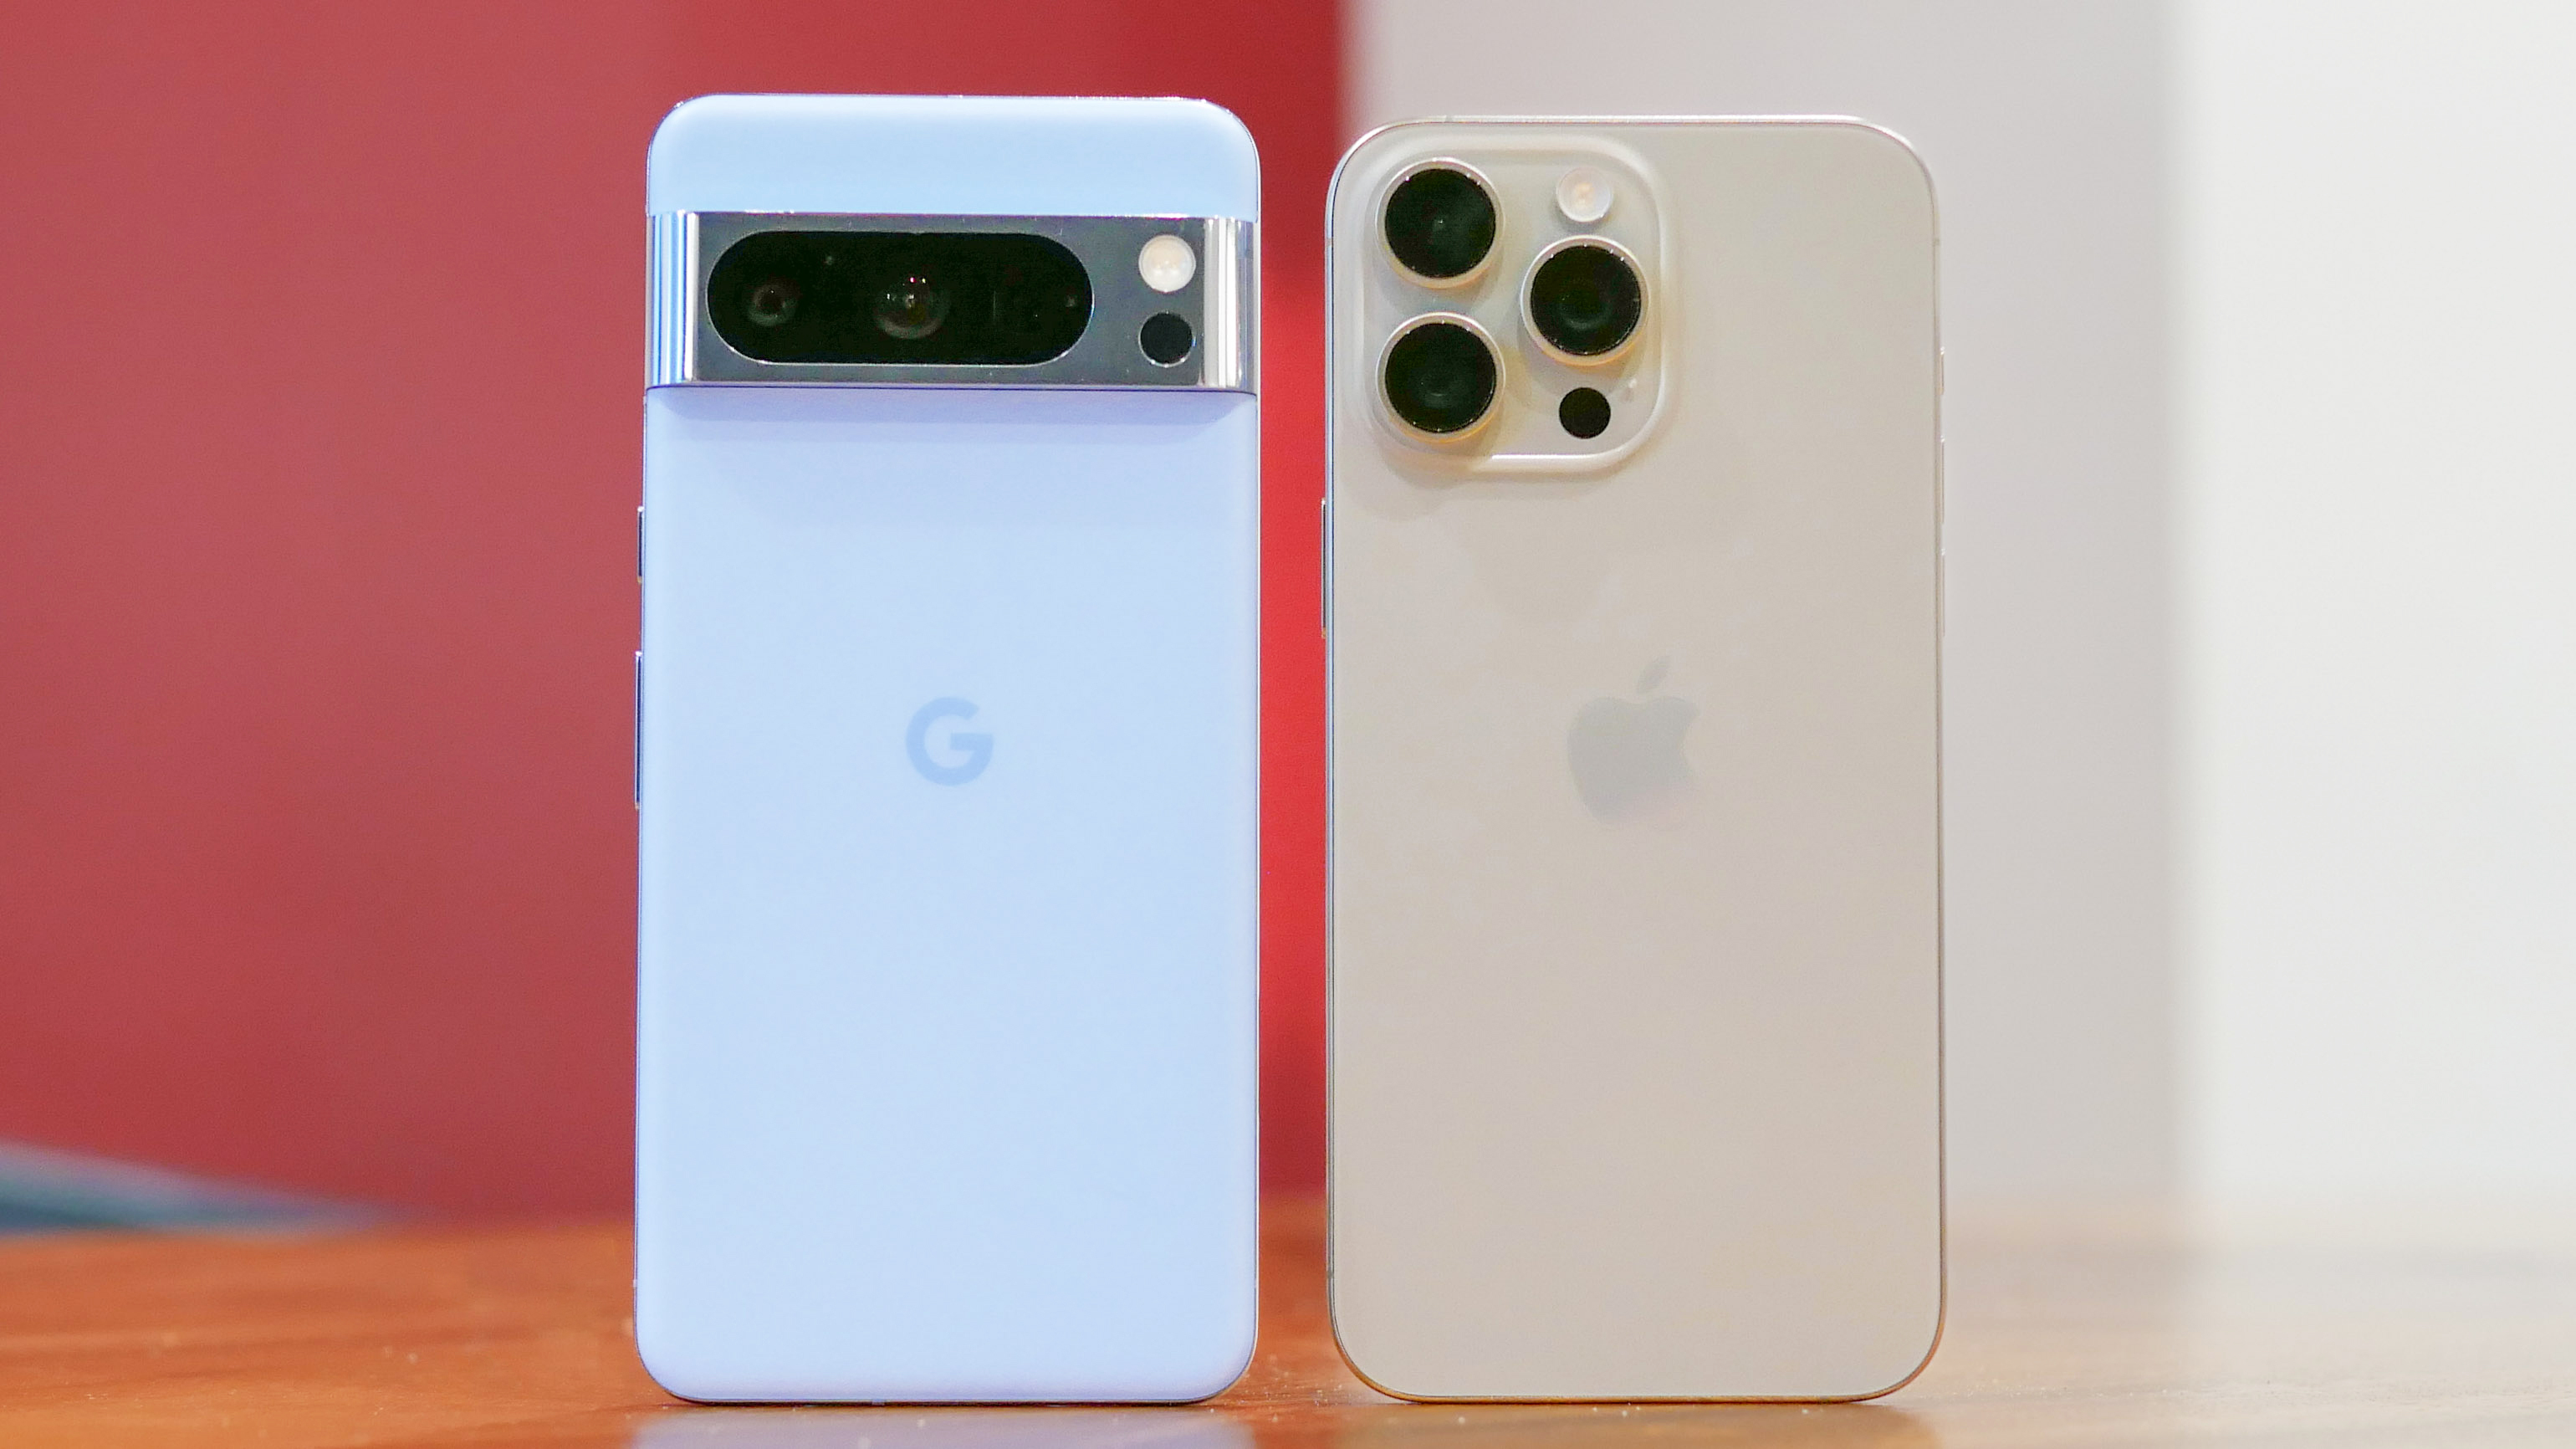 iPhone vs. Android: Which is better for you?